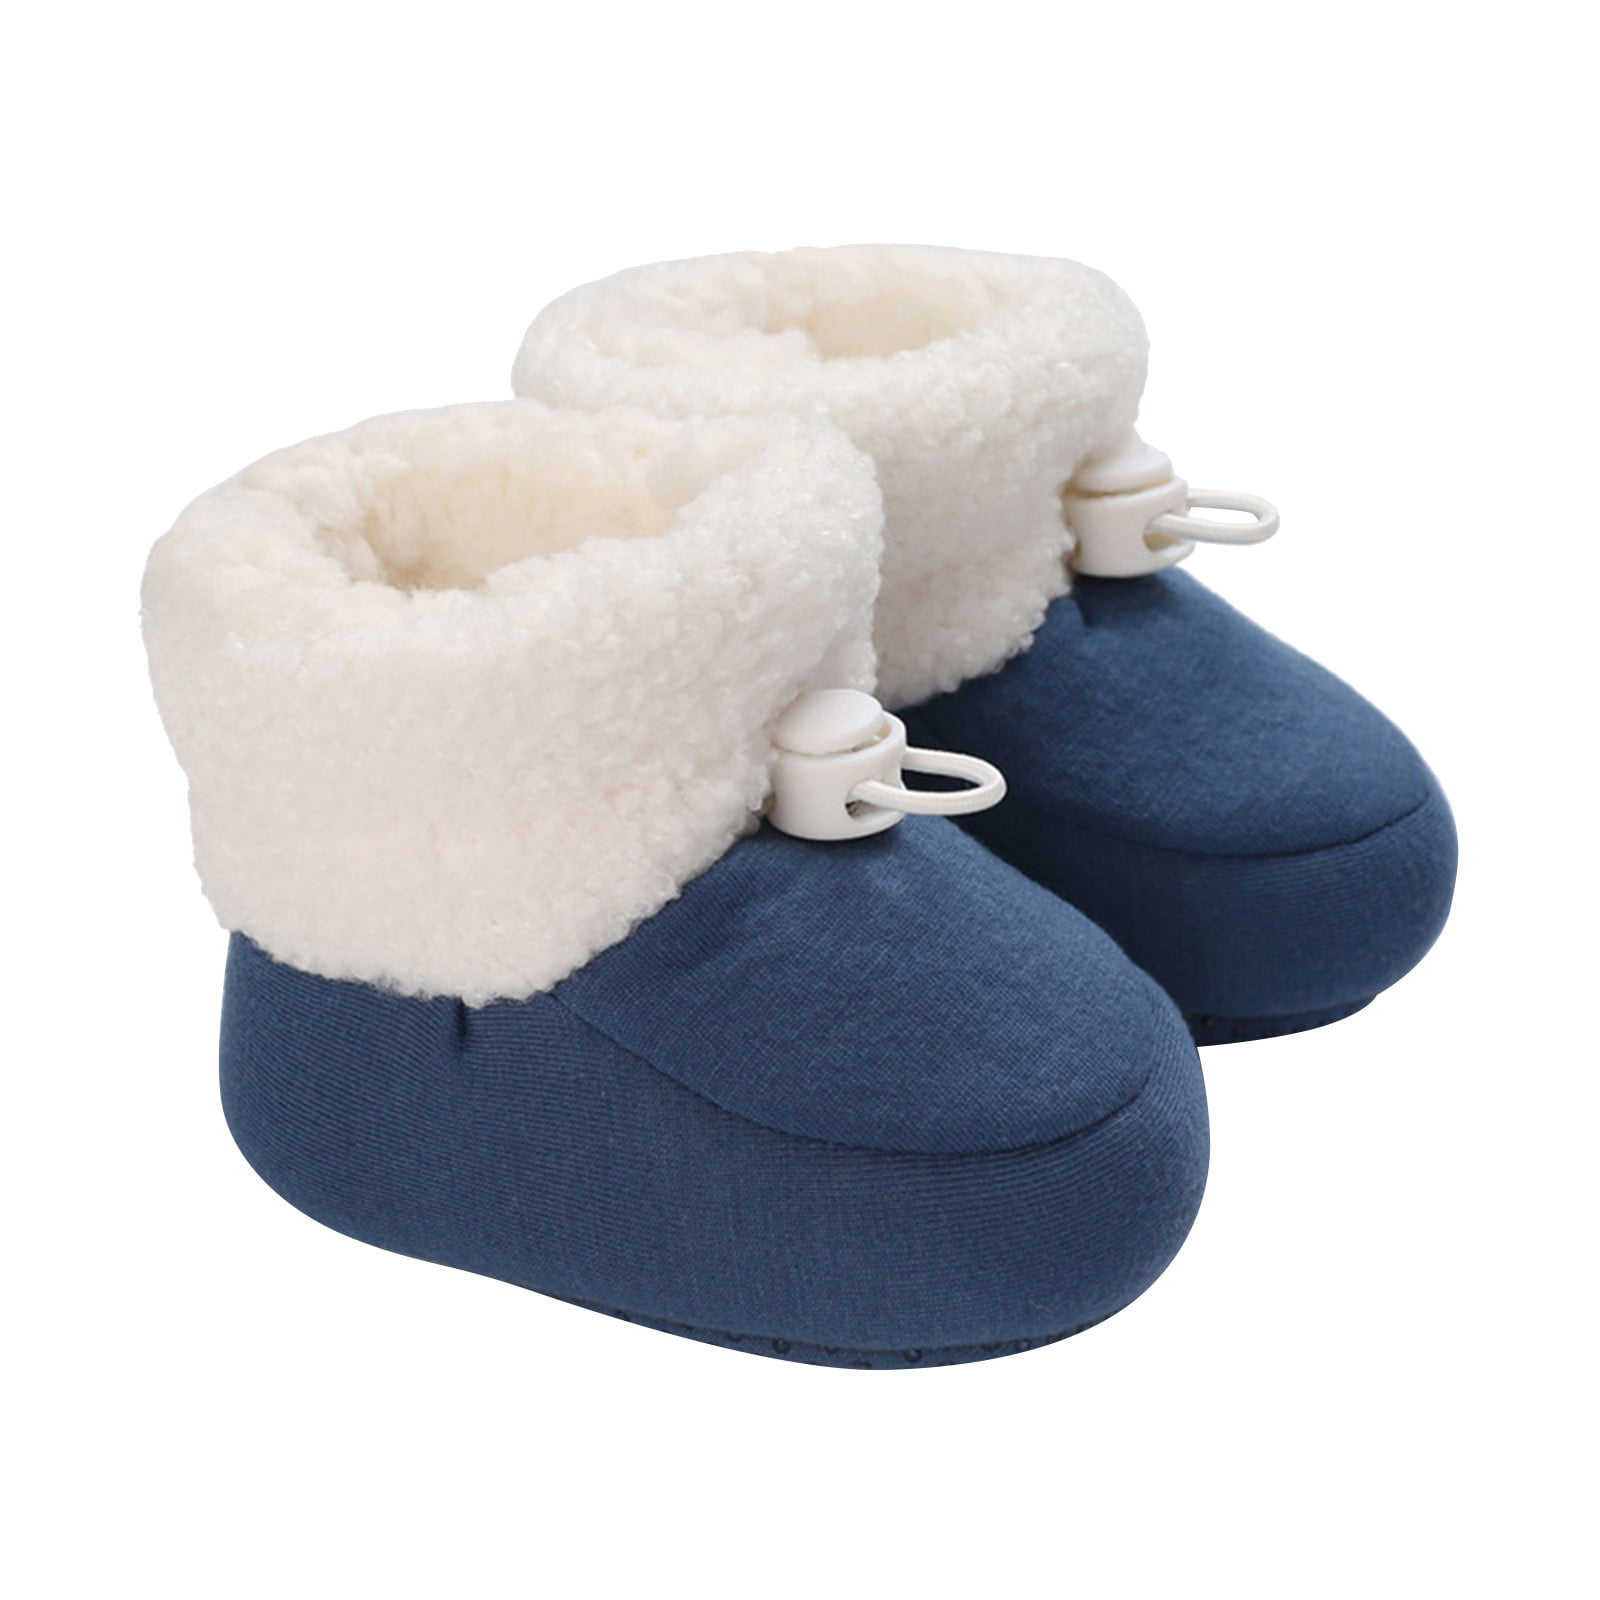 Baby Girls/Boys Snow Boots Soft Plush Inner Shoes Thick Warm Button Boot for Toddler Kids 